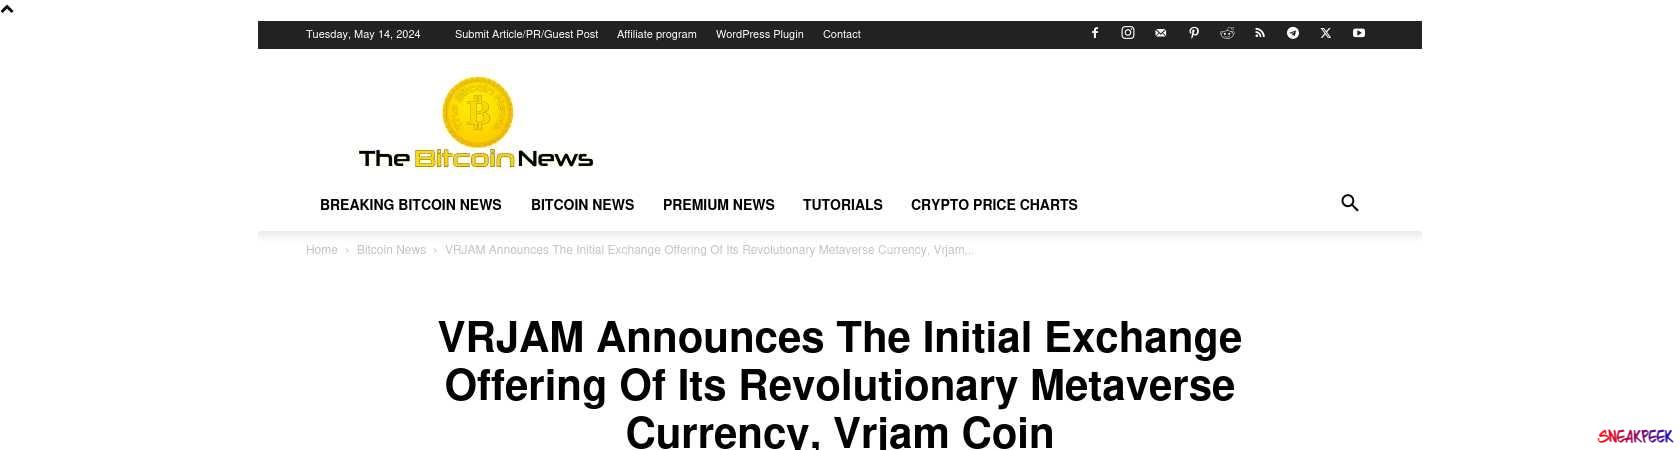 Read the full Article:  ⭲ VRJAM Announces The Initial Exchange Offering Of Its Revolutionary Metaverse Currency, Vrjam Coin